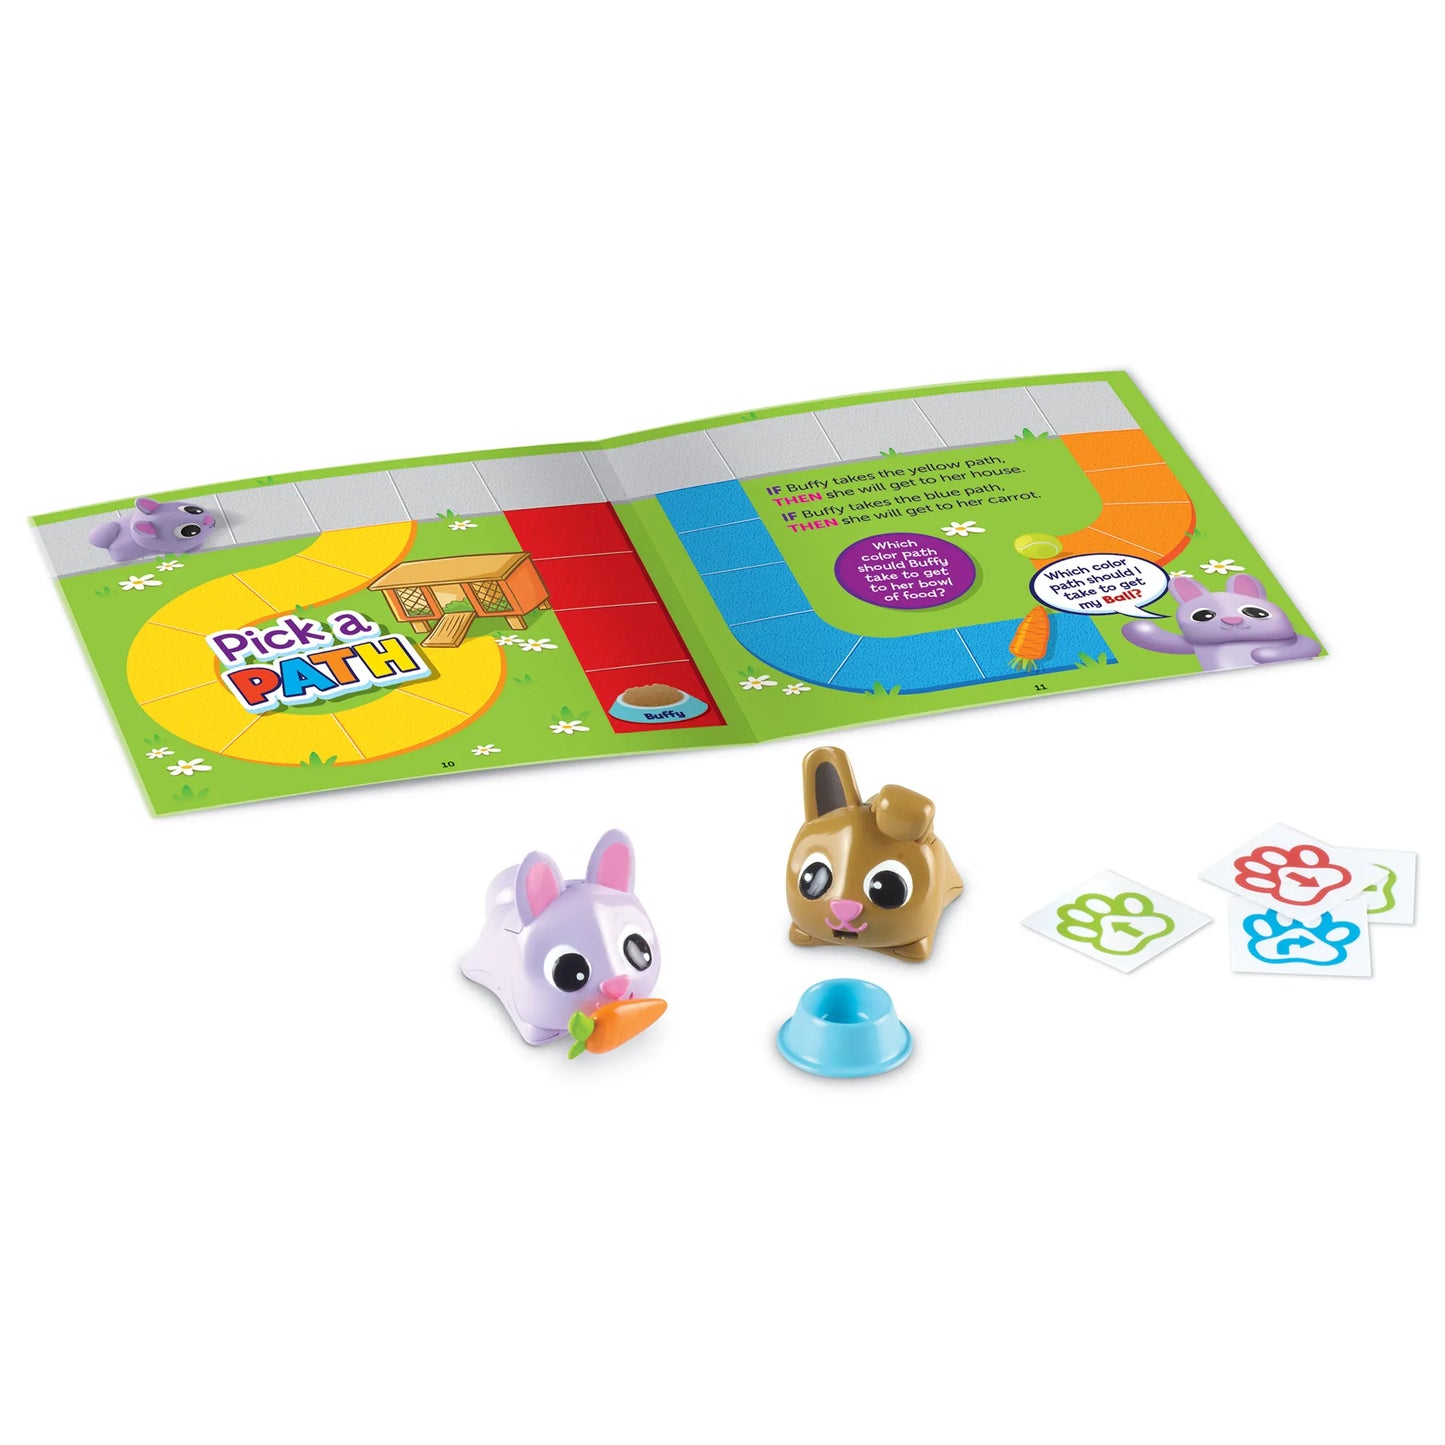 Learning Resources Coding Critters Pair-a-Pets Adventures with Fluffy & Buffy